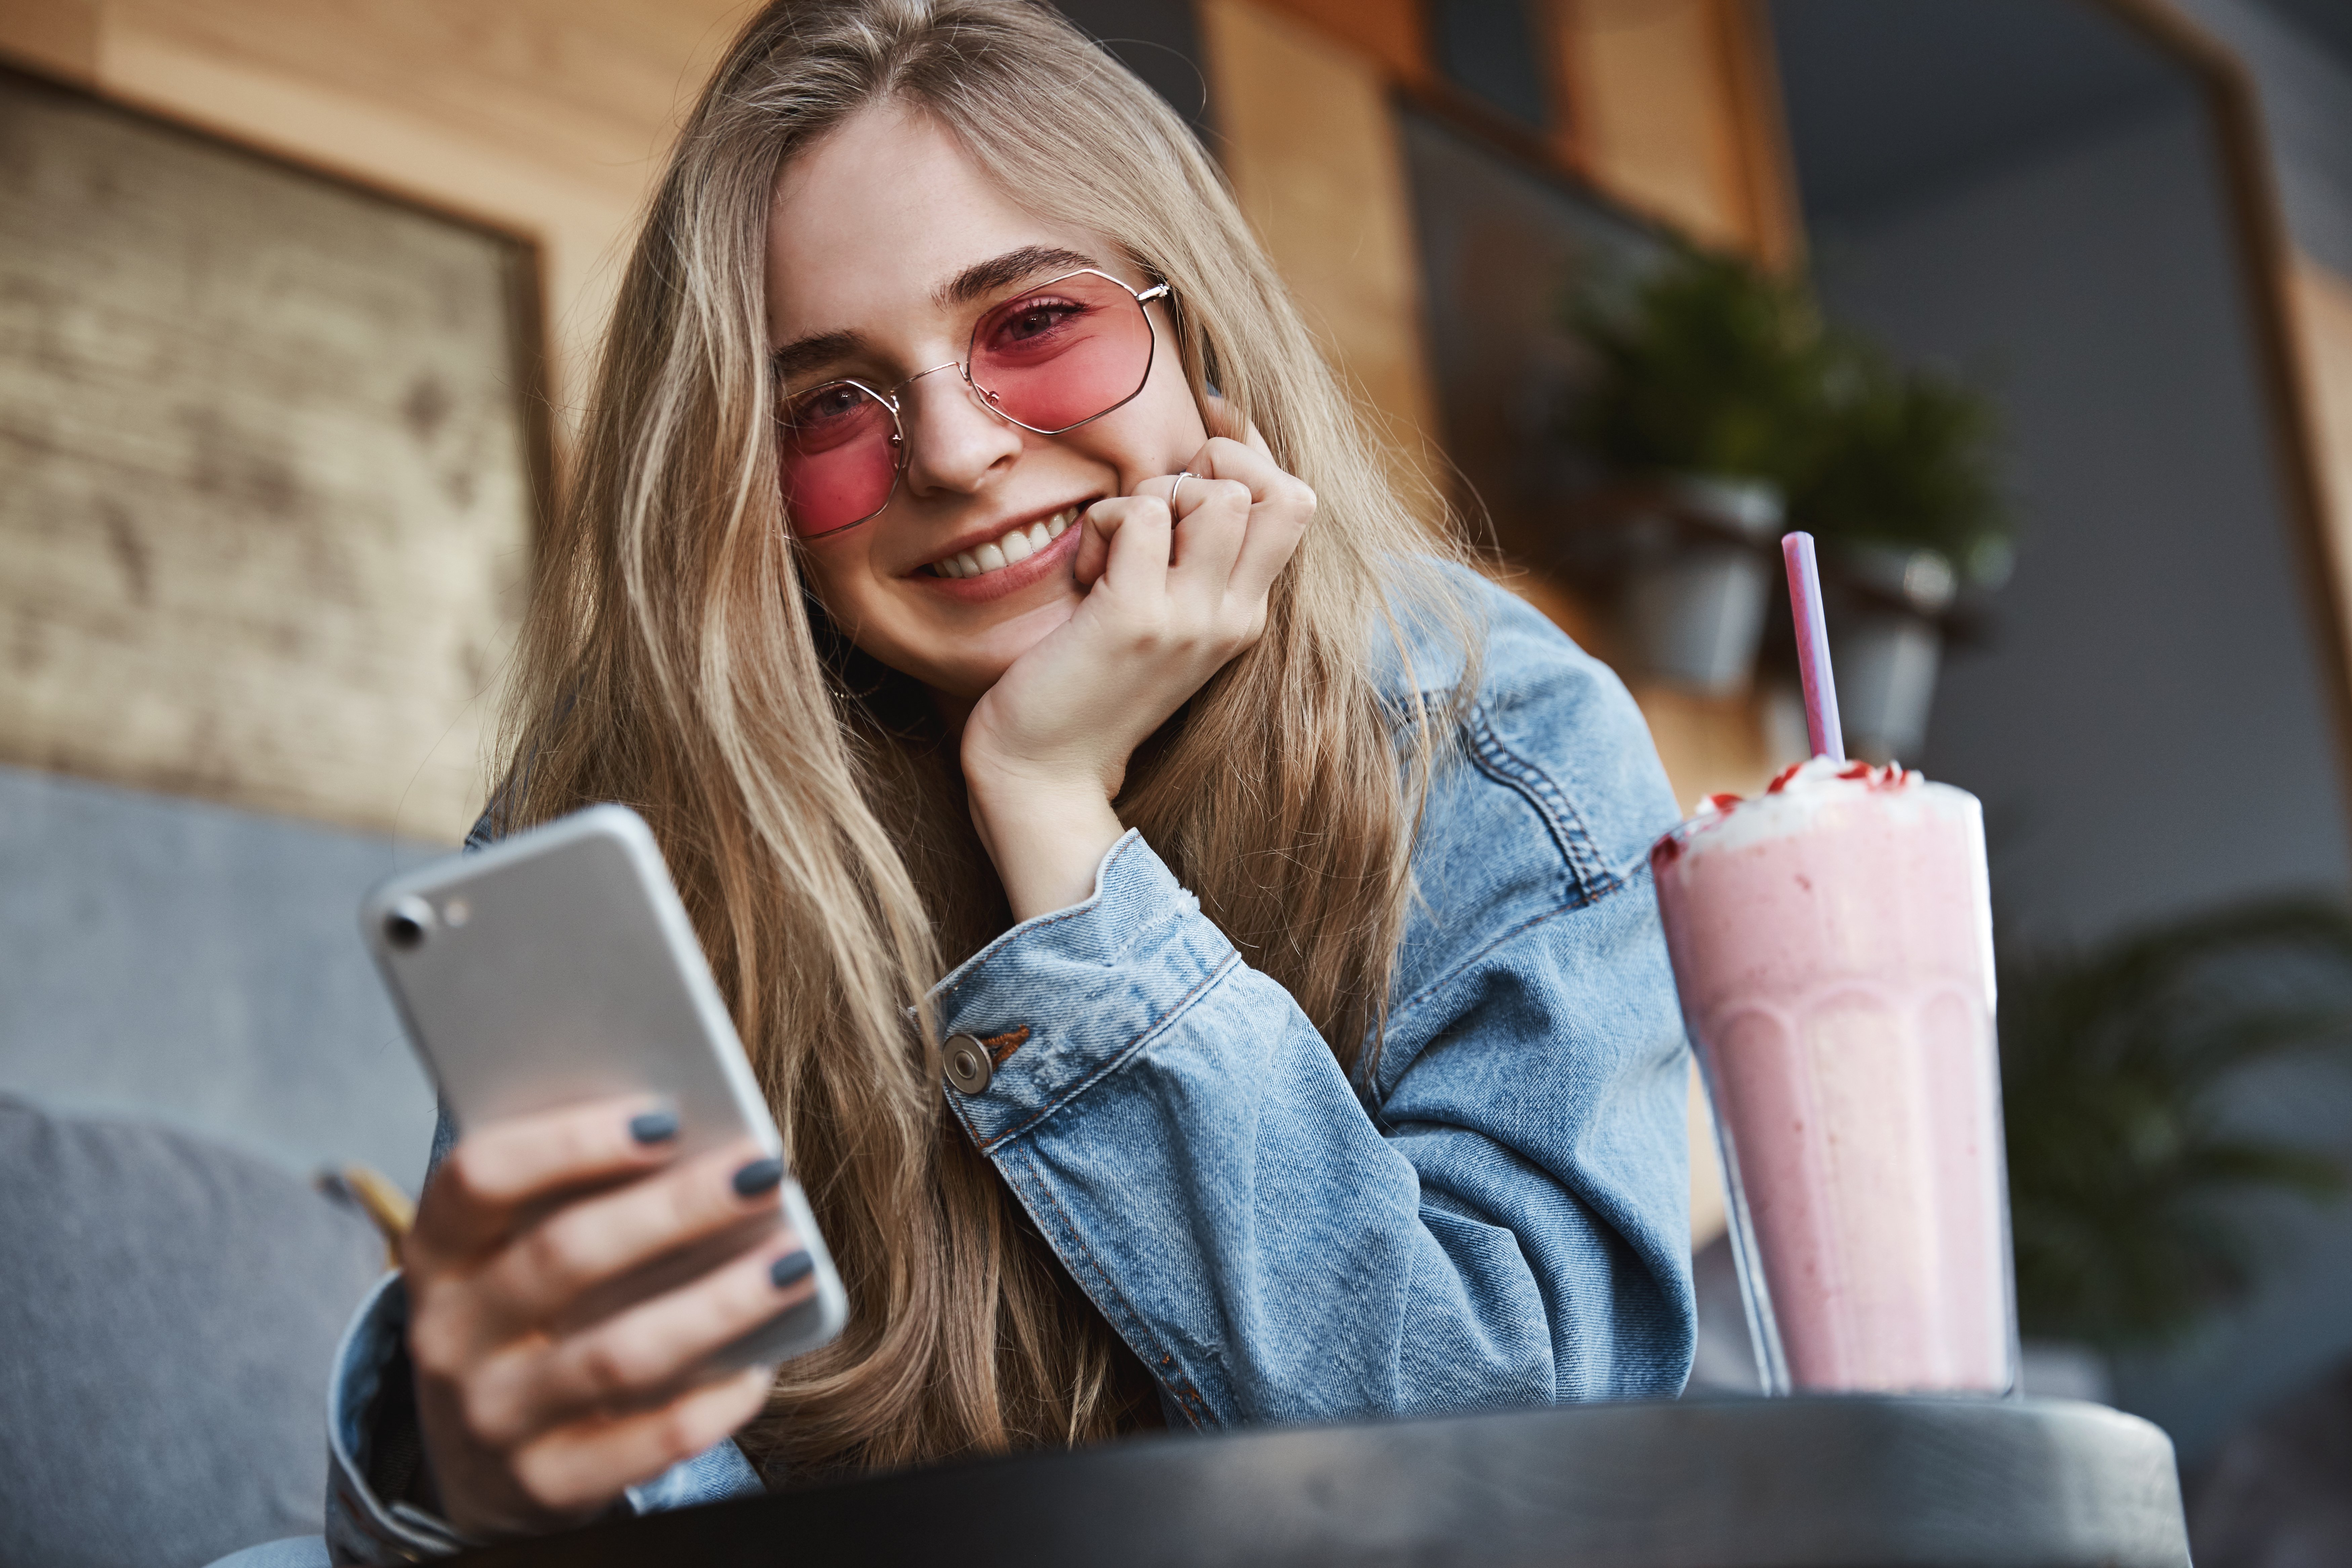 eating-out-leisure-concept-beautiful-blond-girl-sunglass